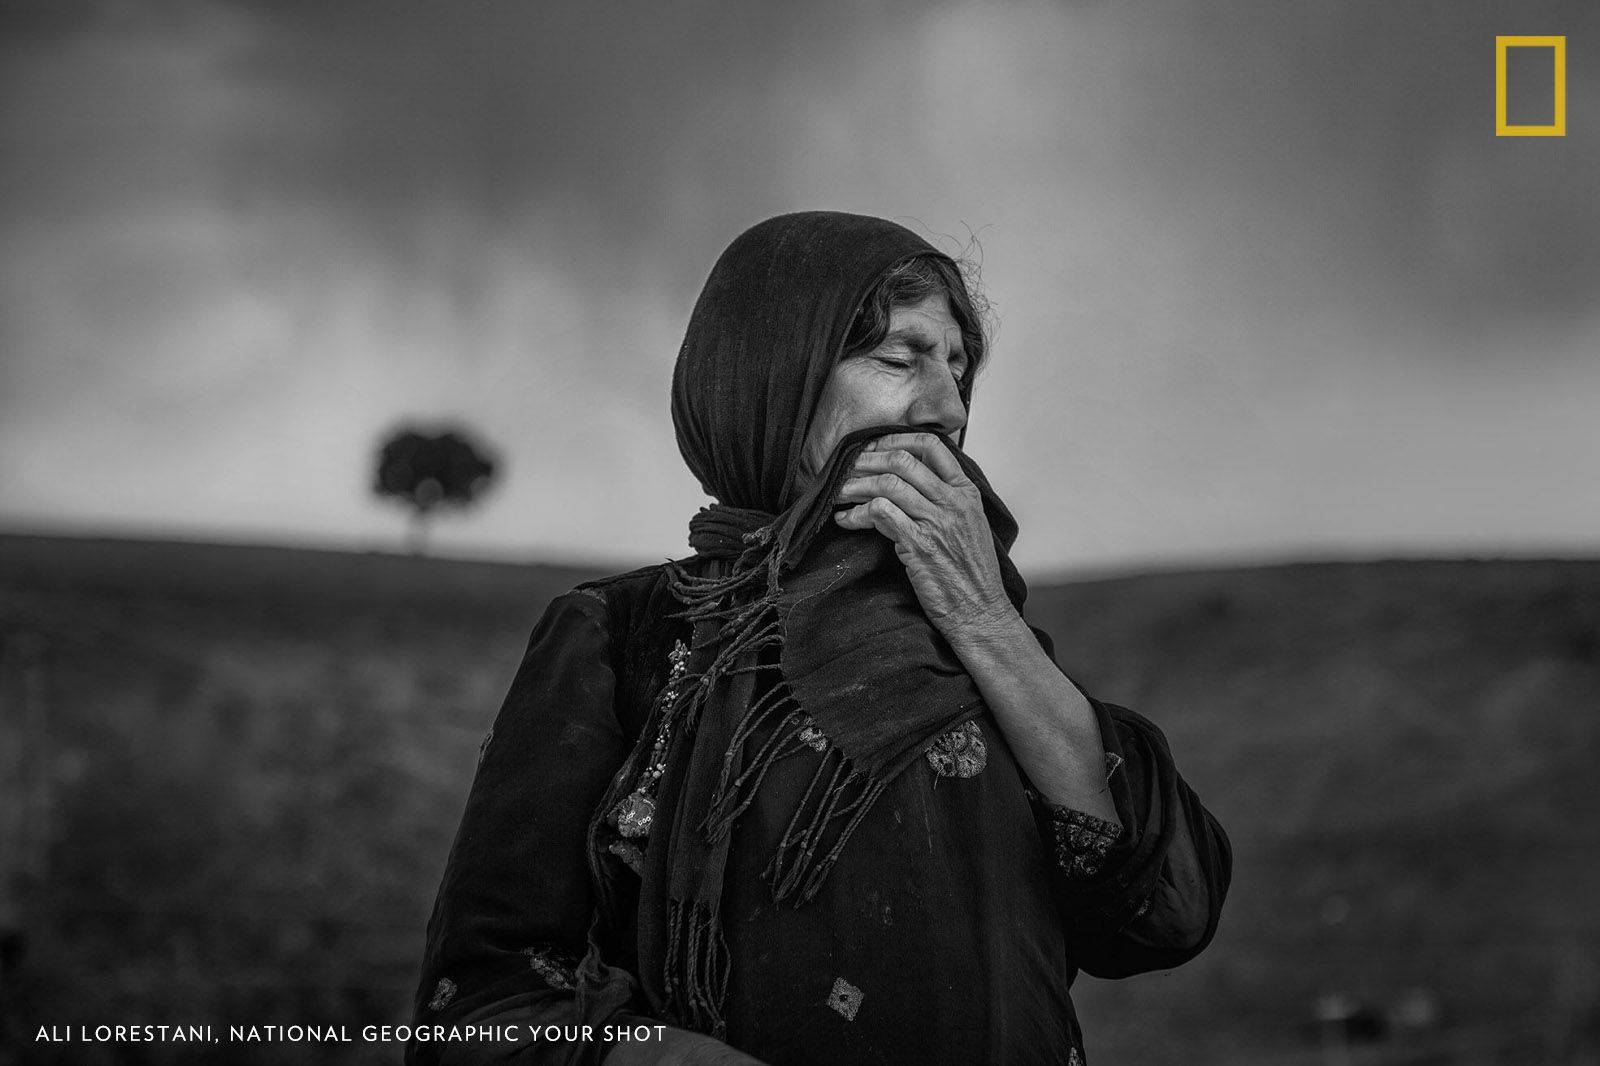 A Kurdish woman with anxiety, sadness, hope… full of life.  She has no way, no other choices. She has to continue and look forward to something. She has a treasure called hope. Image by Ali Lorestani.
